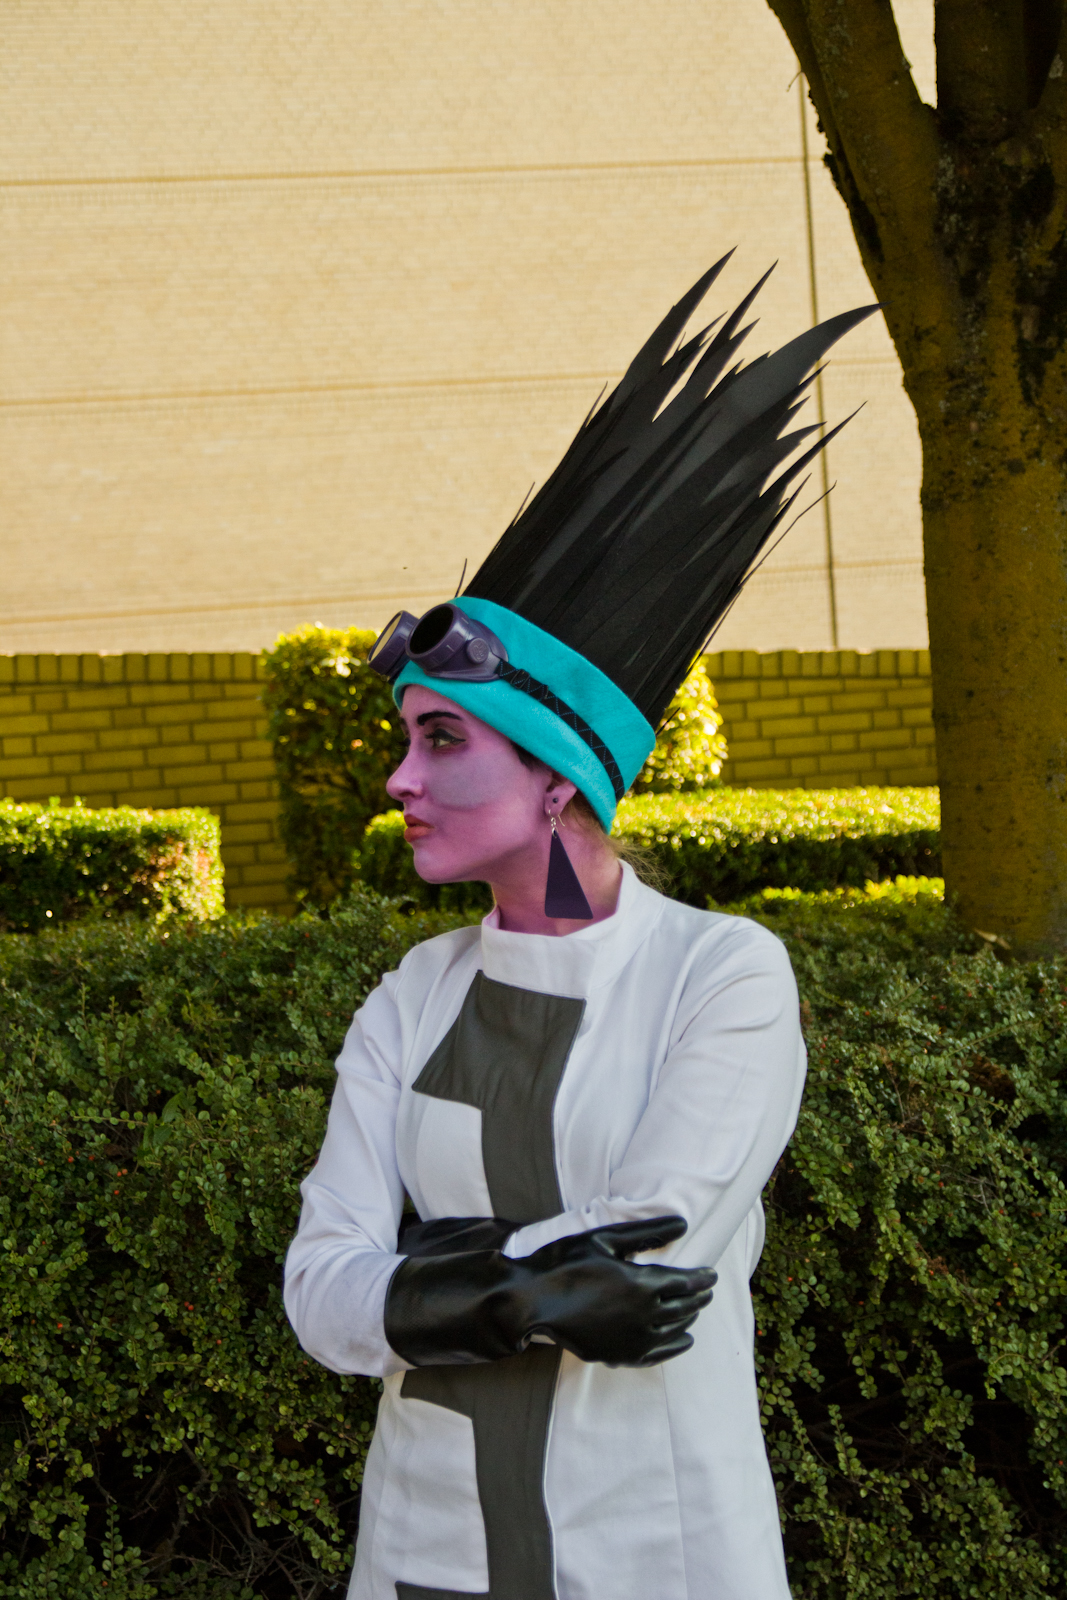 Characters: Yzma and Kronk from Disney's The Emperor's New Groove...